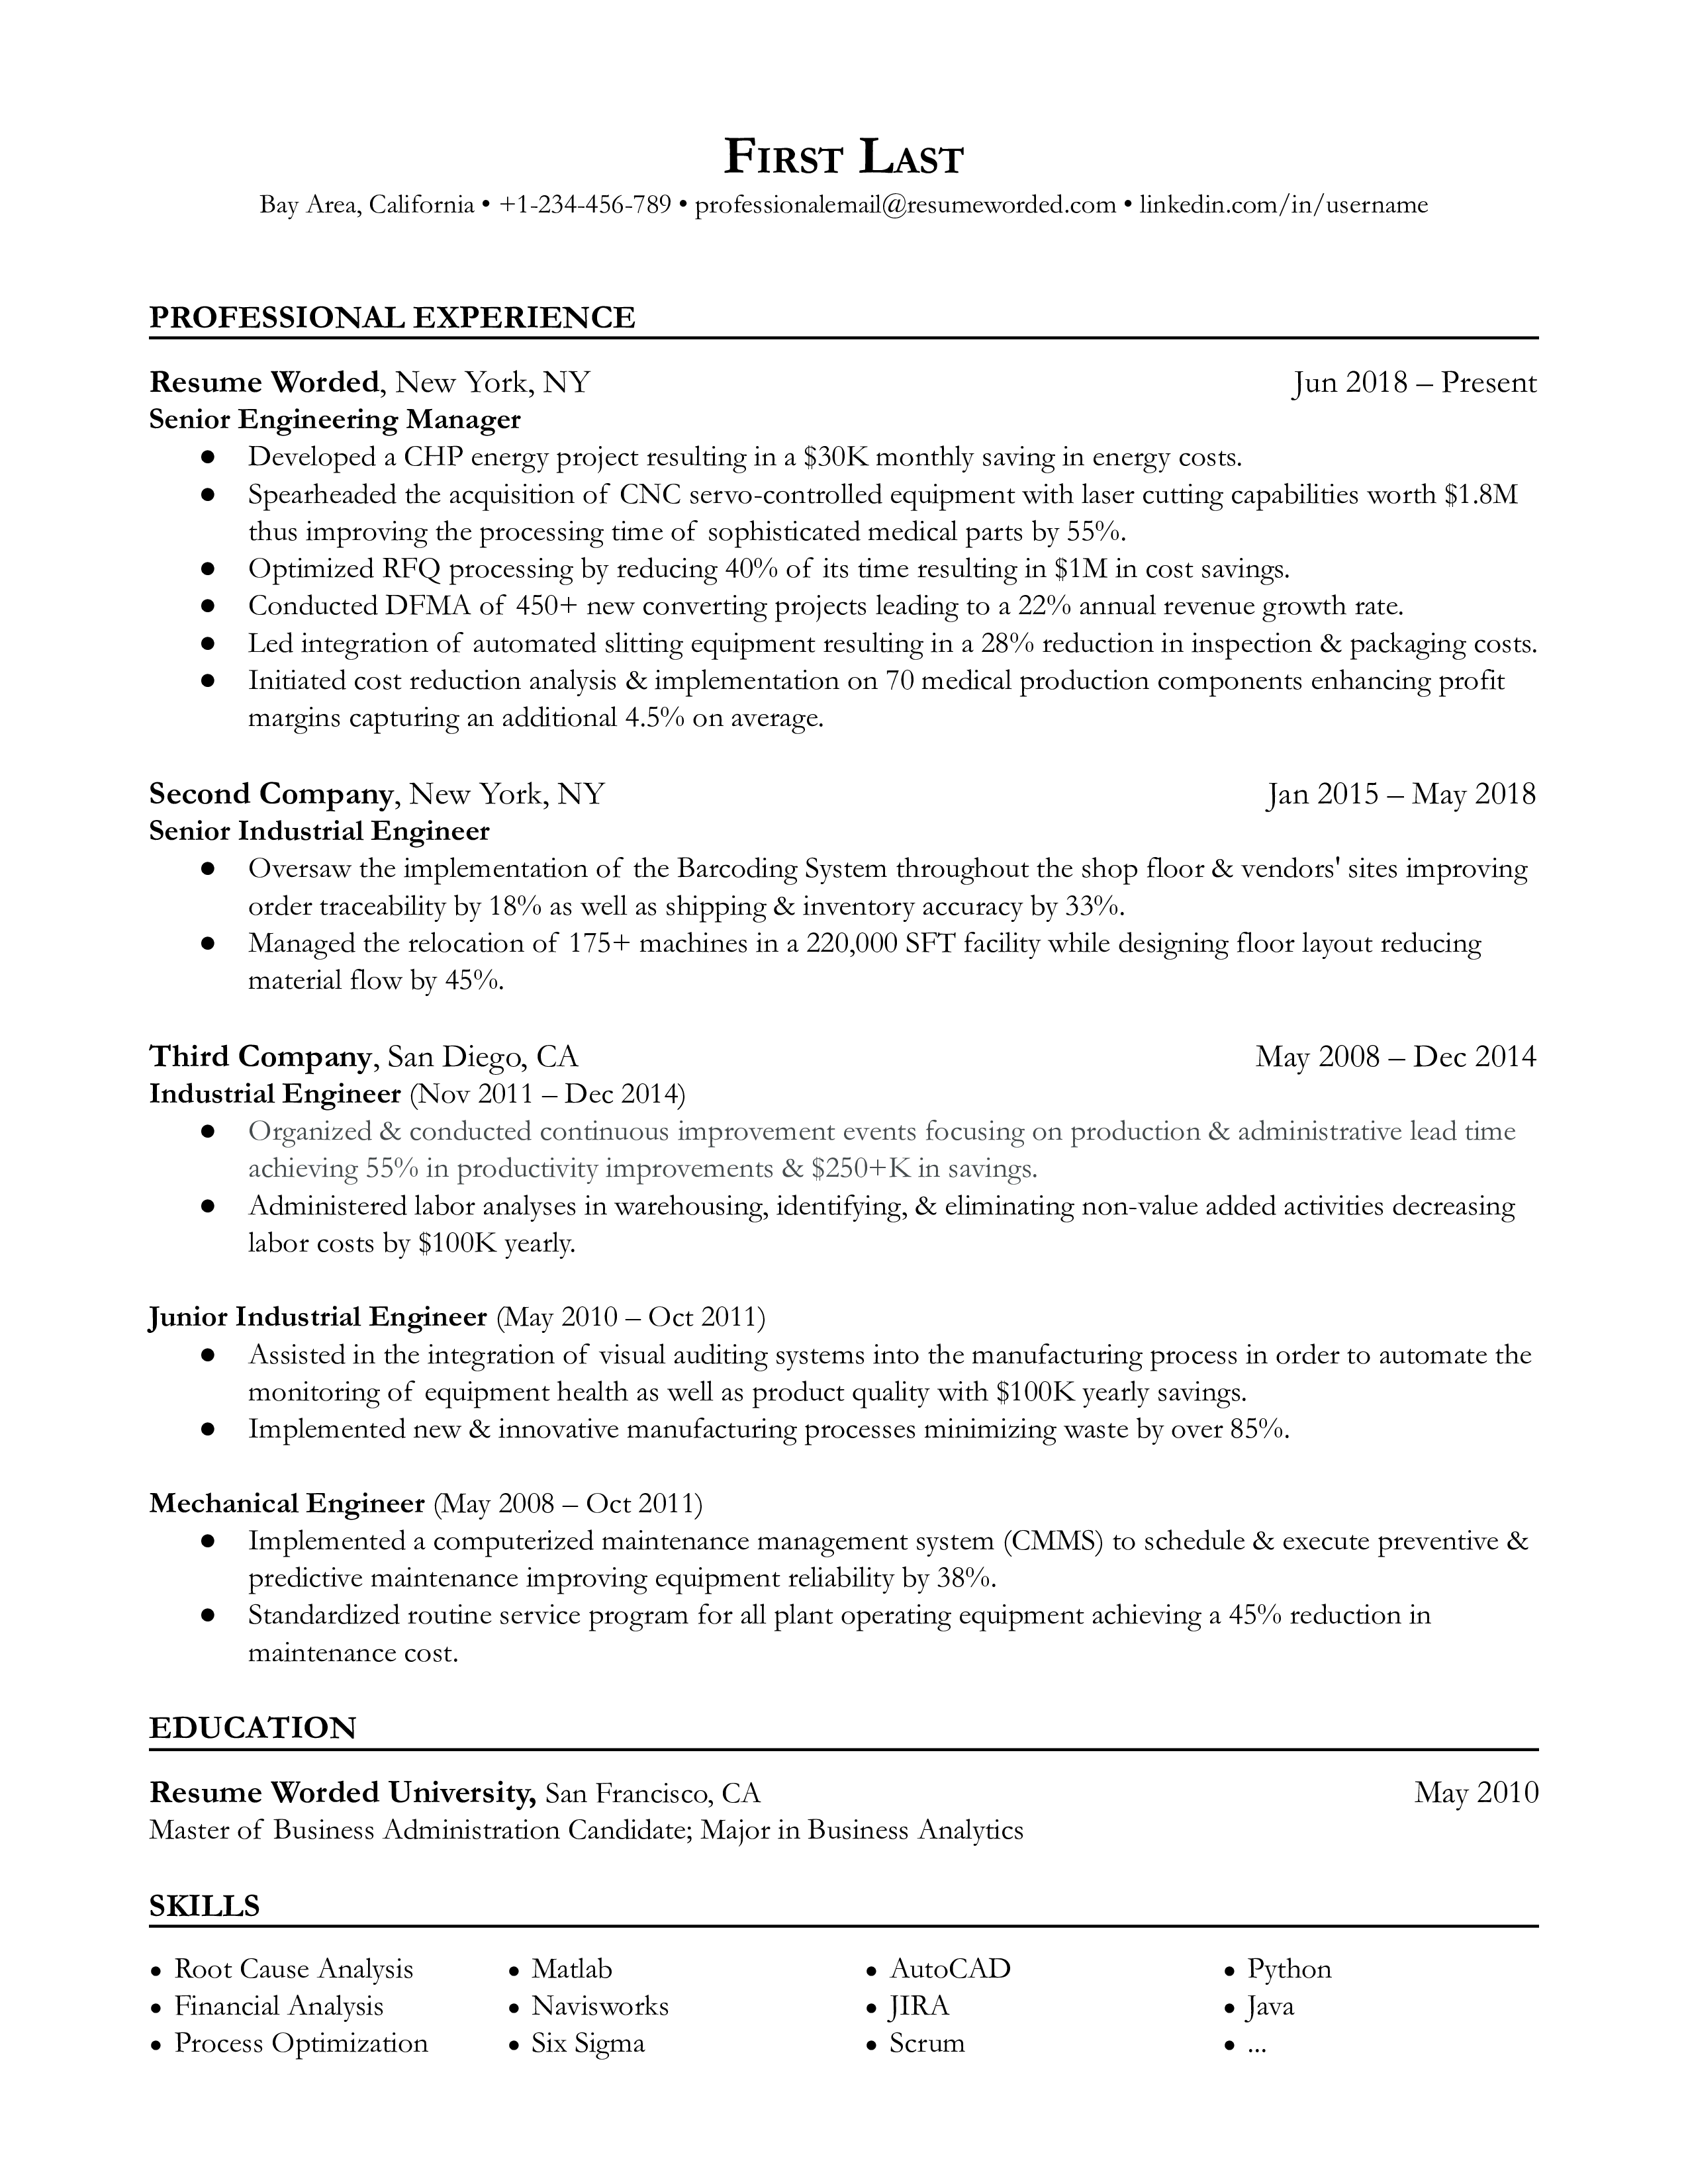 A CV screenshot for a Senior Engineering Manager role showing strategic project leadership and advanced technical skills.